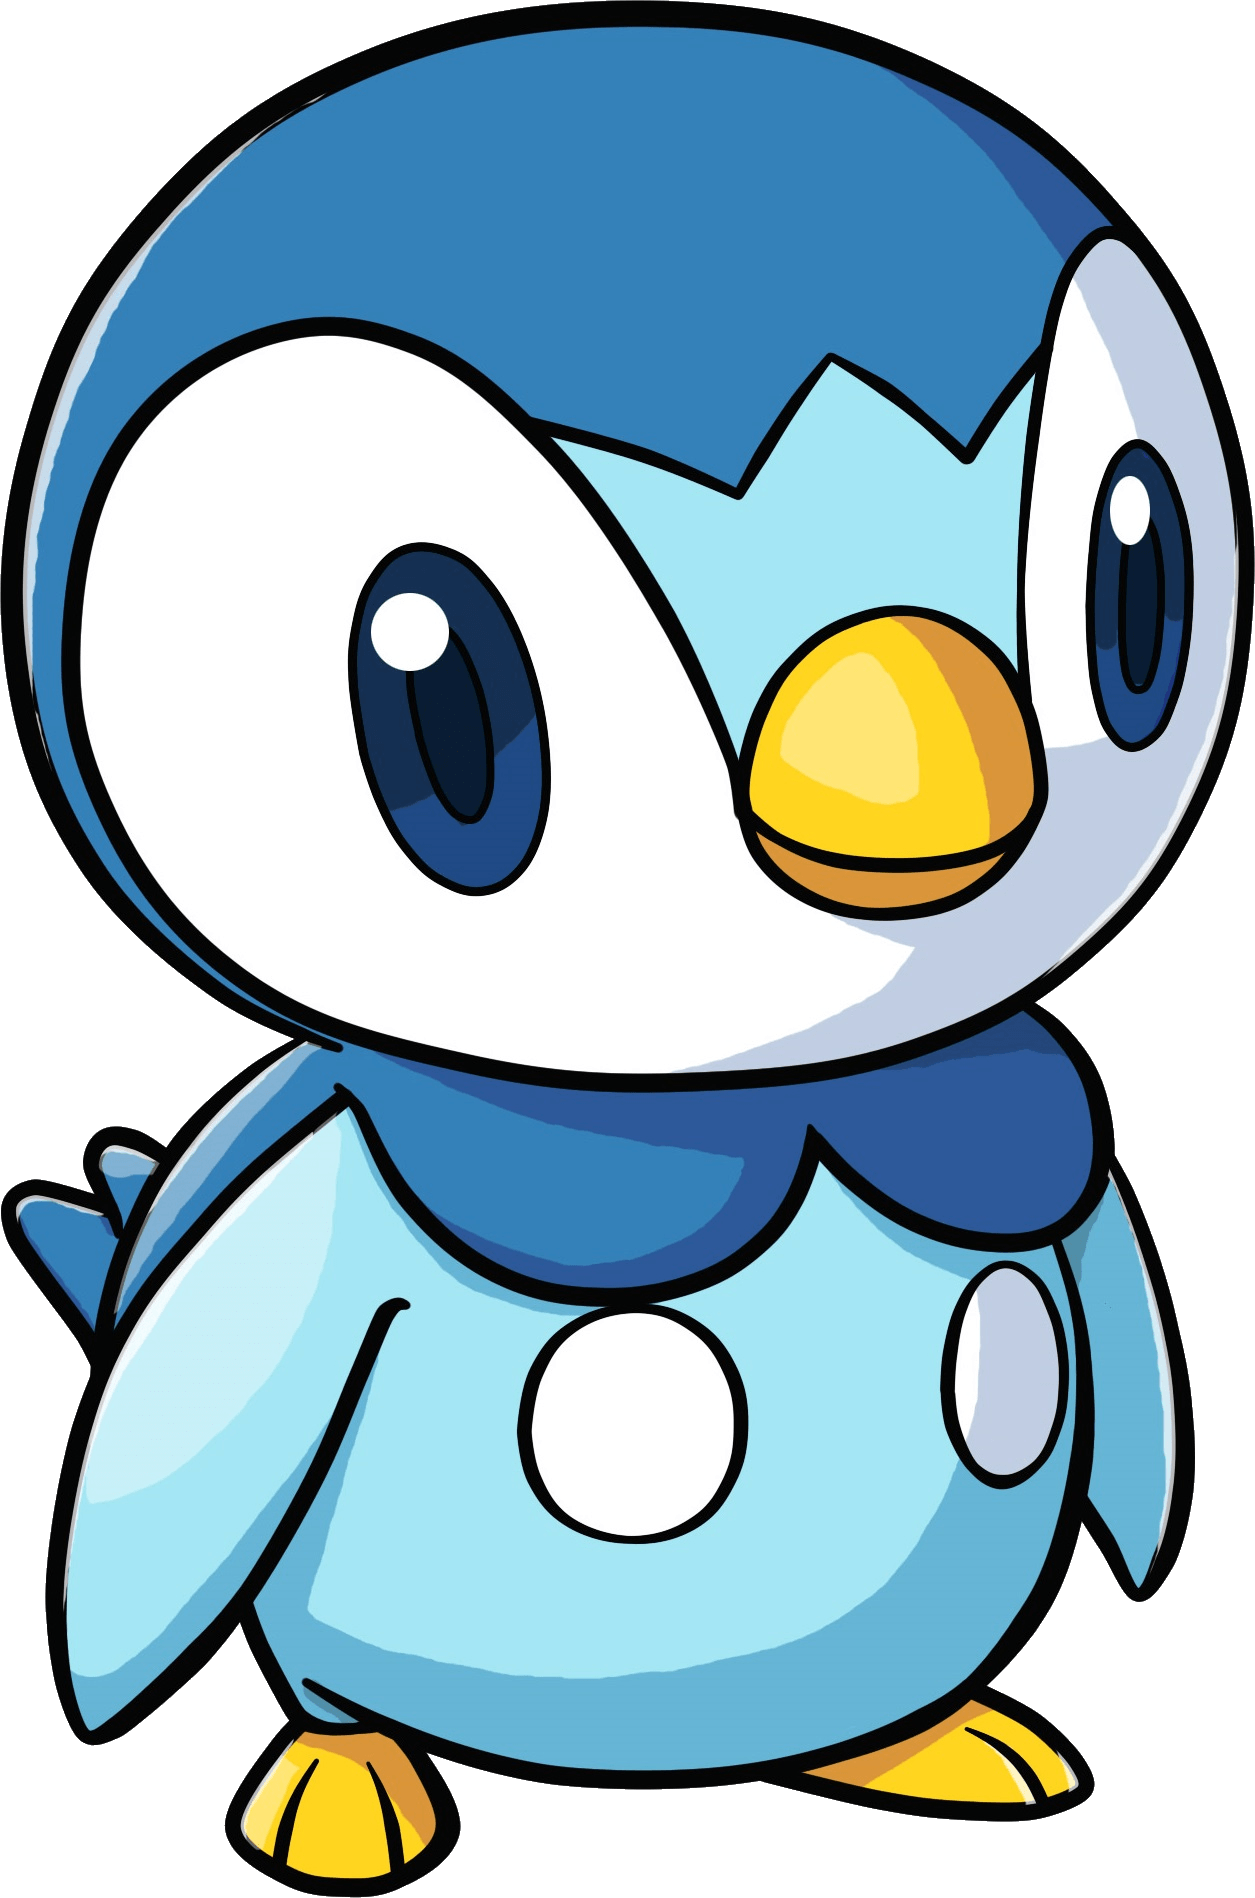 Piplup Pokemon Transparent Images